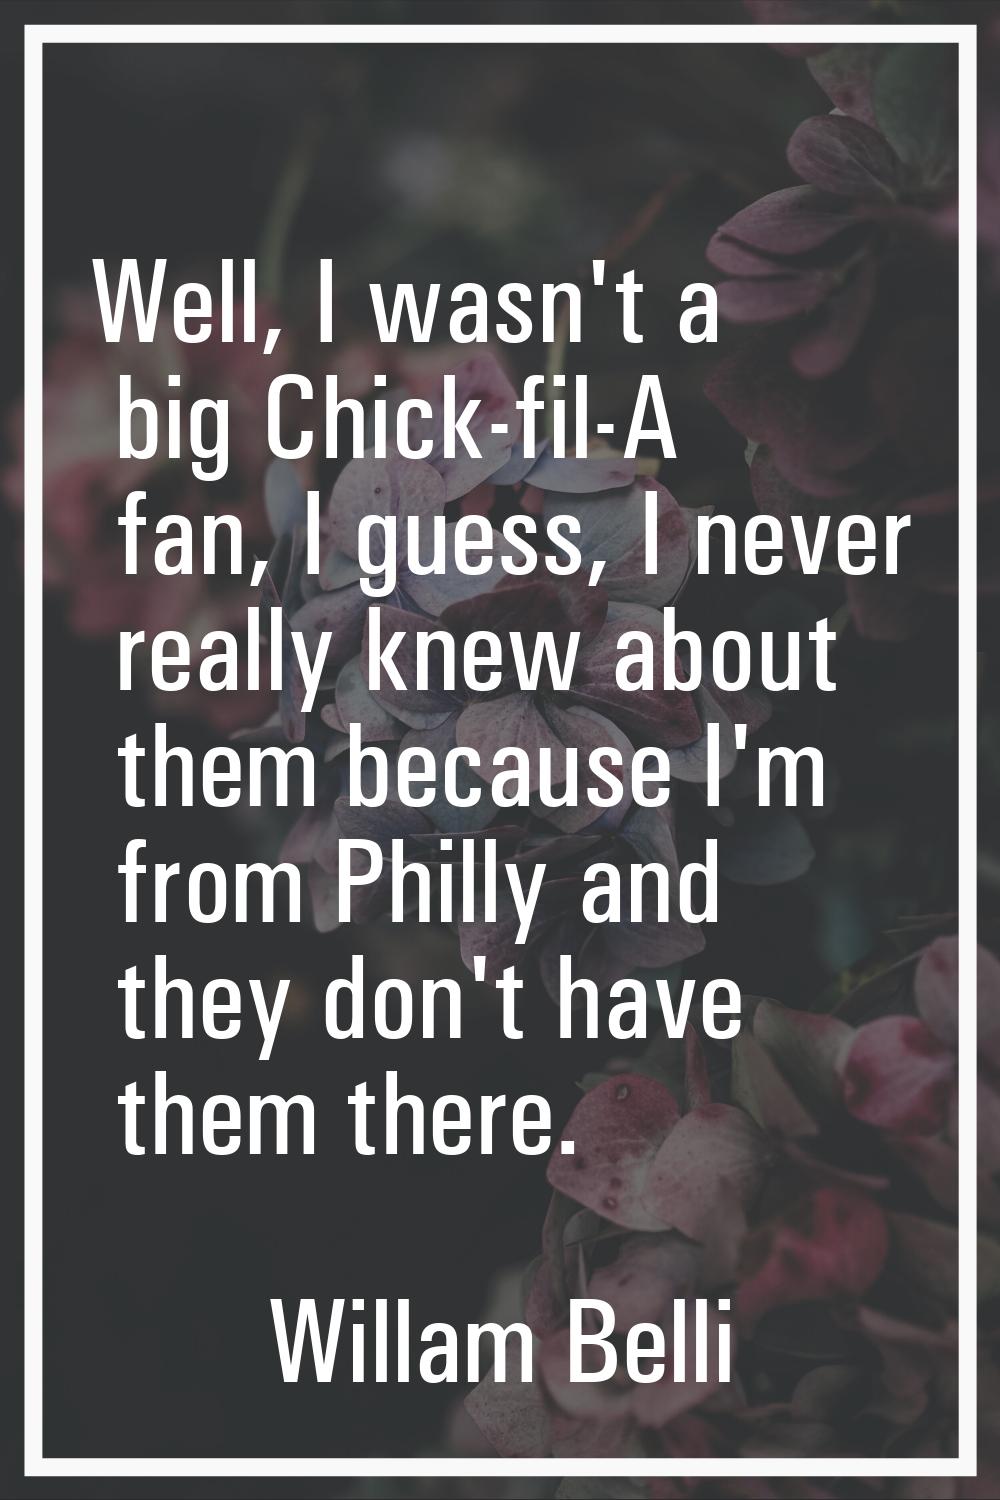 Well, I wasn't a big Chick-fil-A fan, I guess, I never really knew about them because I'm from Phil